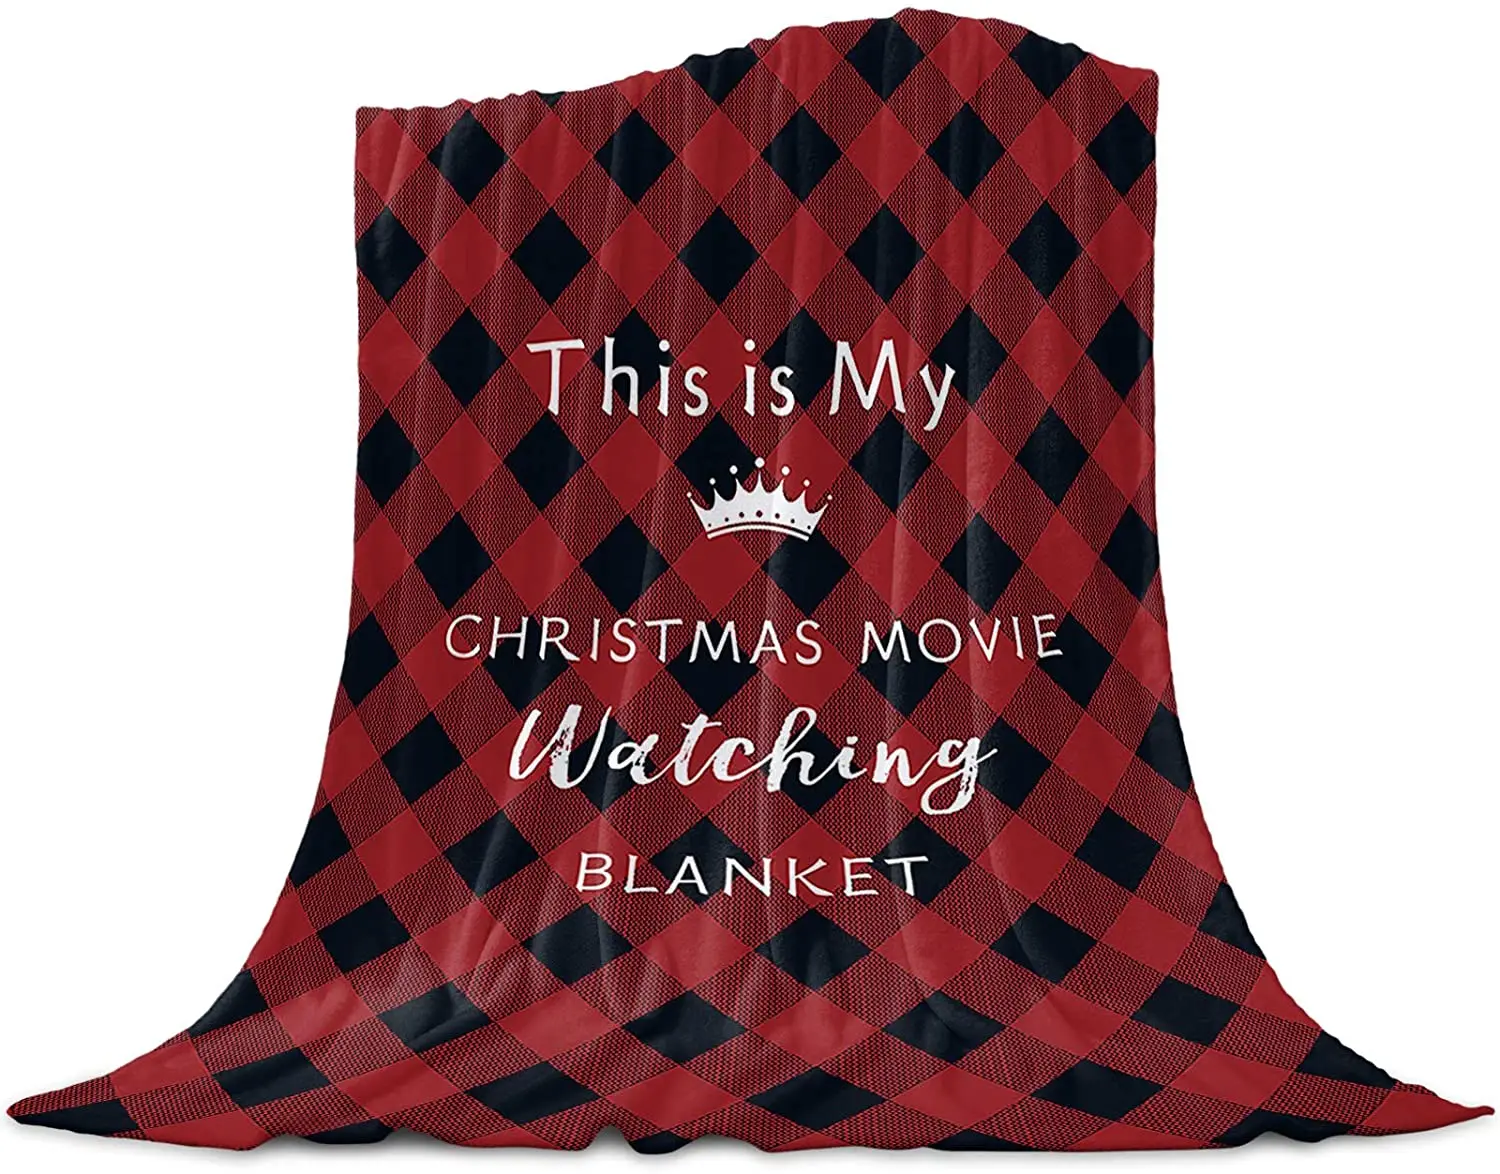 

Merry Christmas Fannel Fleece Throw Blanket This is My Christmas Movie Watching Blanket Lightweight Soft Cozy Luxury Bed Blanket